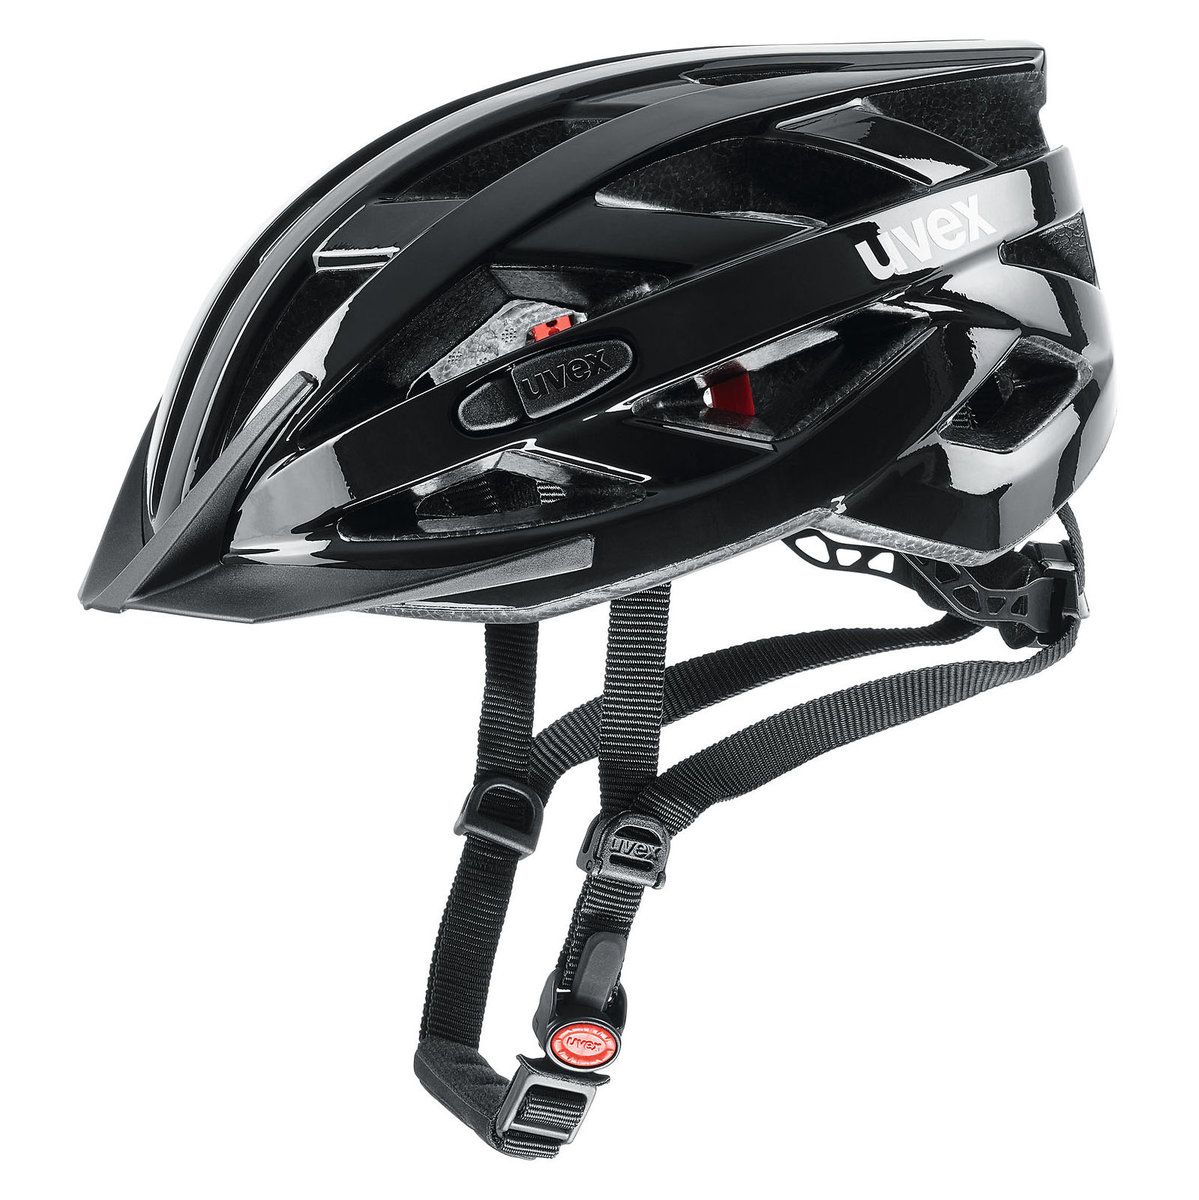 UVEX i-vo 3d kask rowerowy, szary, s 4104290215